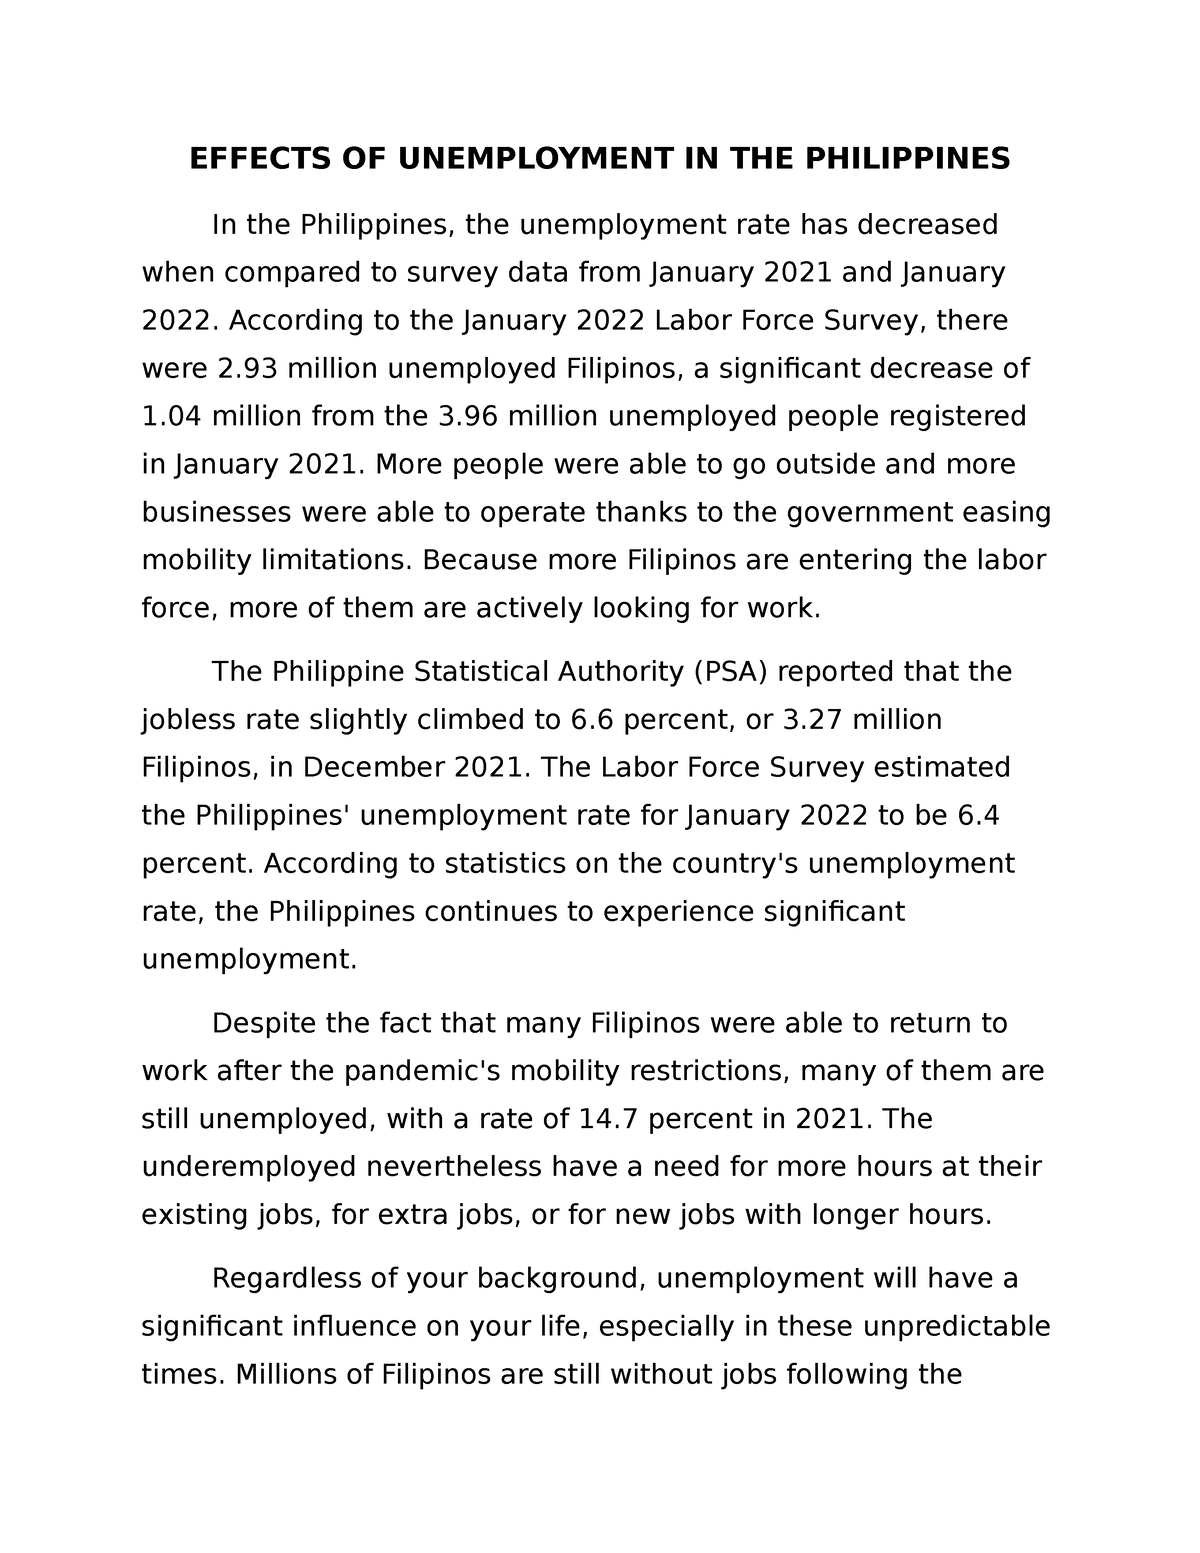 reflective essay about unemployment in the philippines